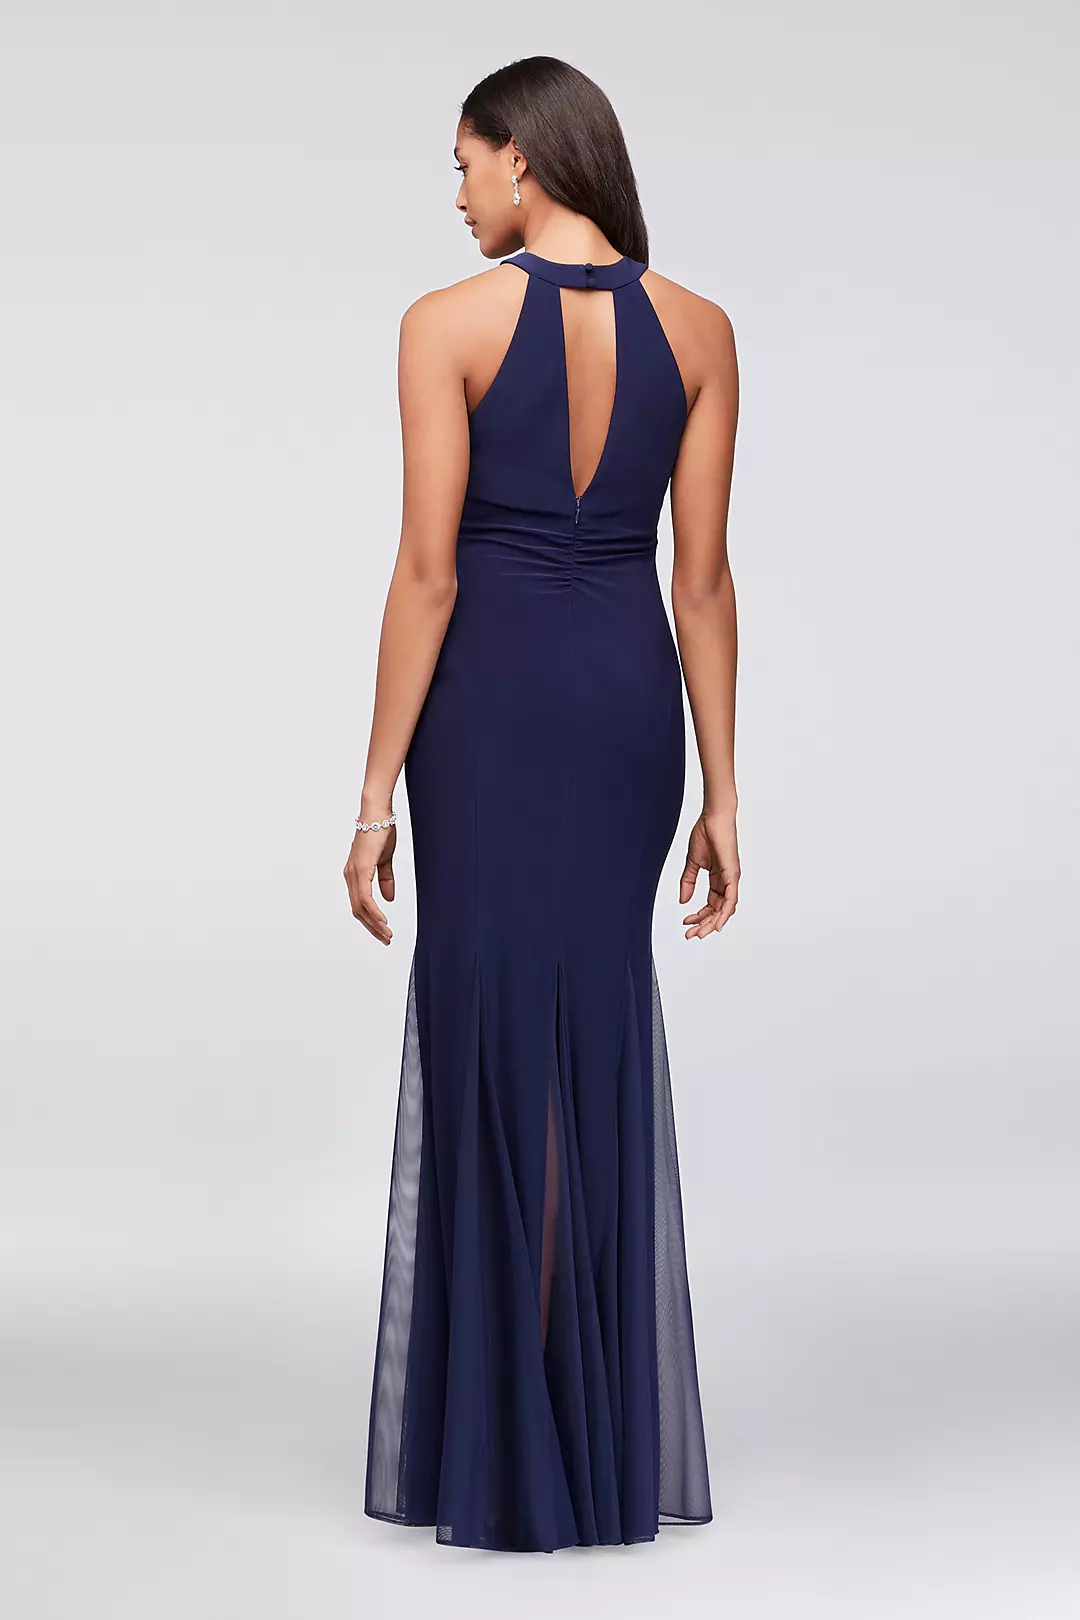 Illusion Keyhole Jersey Gown with Layered Waist Image 2